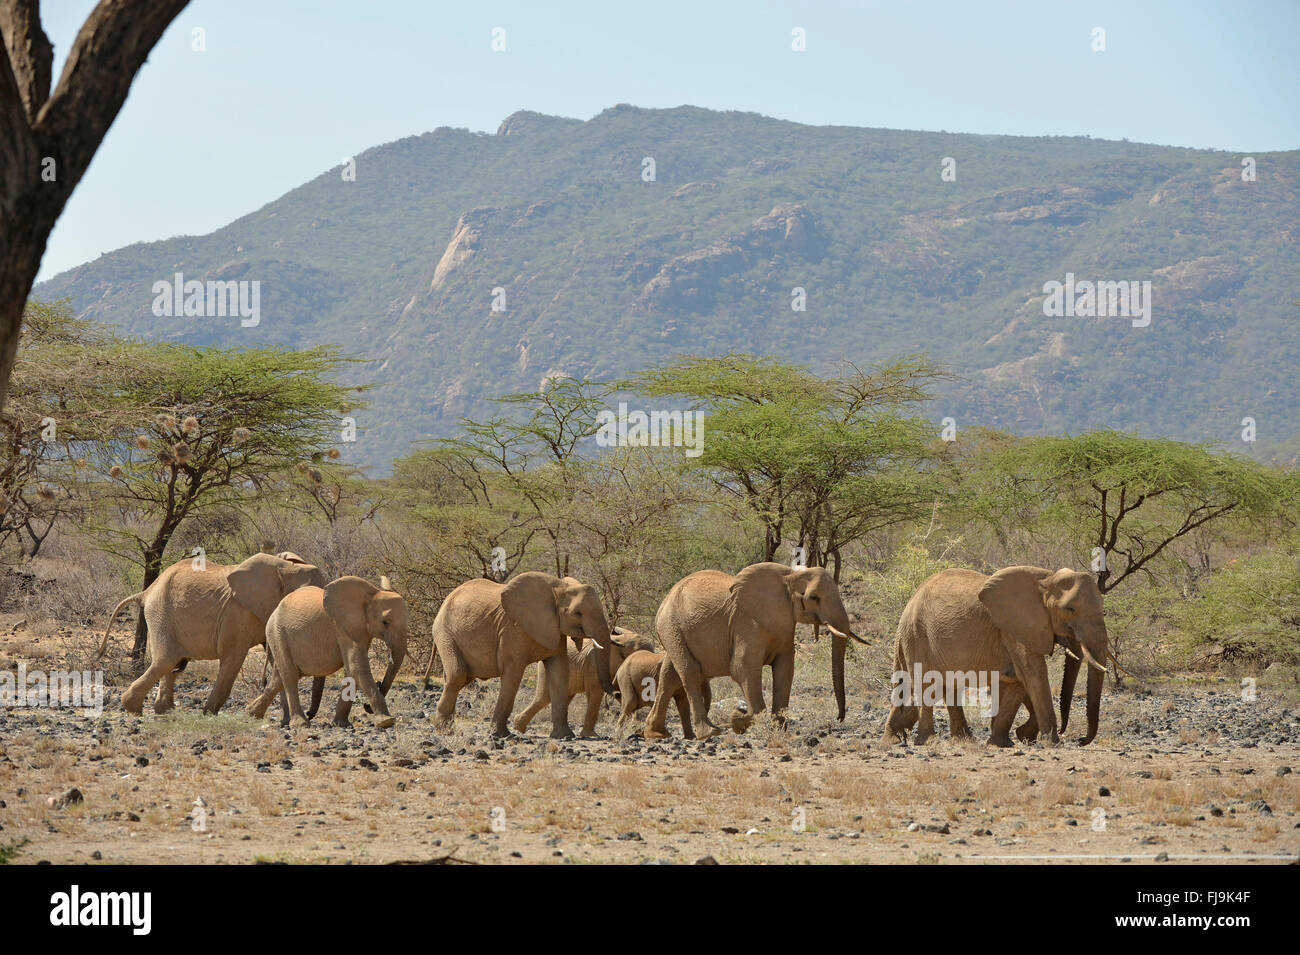 African Elephant (Loxodonta africana) small group of adults and young walking together in arid countryside, Shaba National Reser Stock Photo